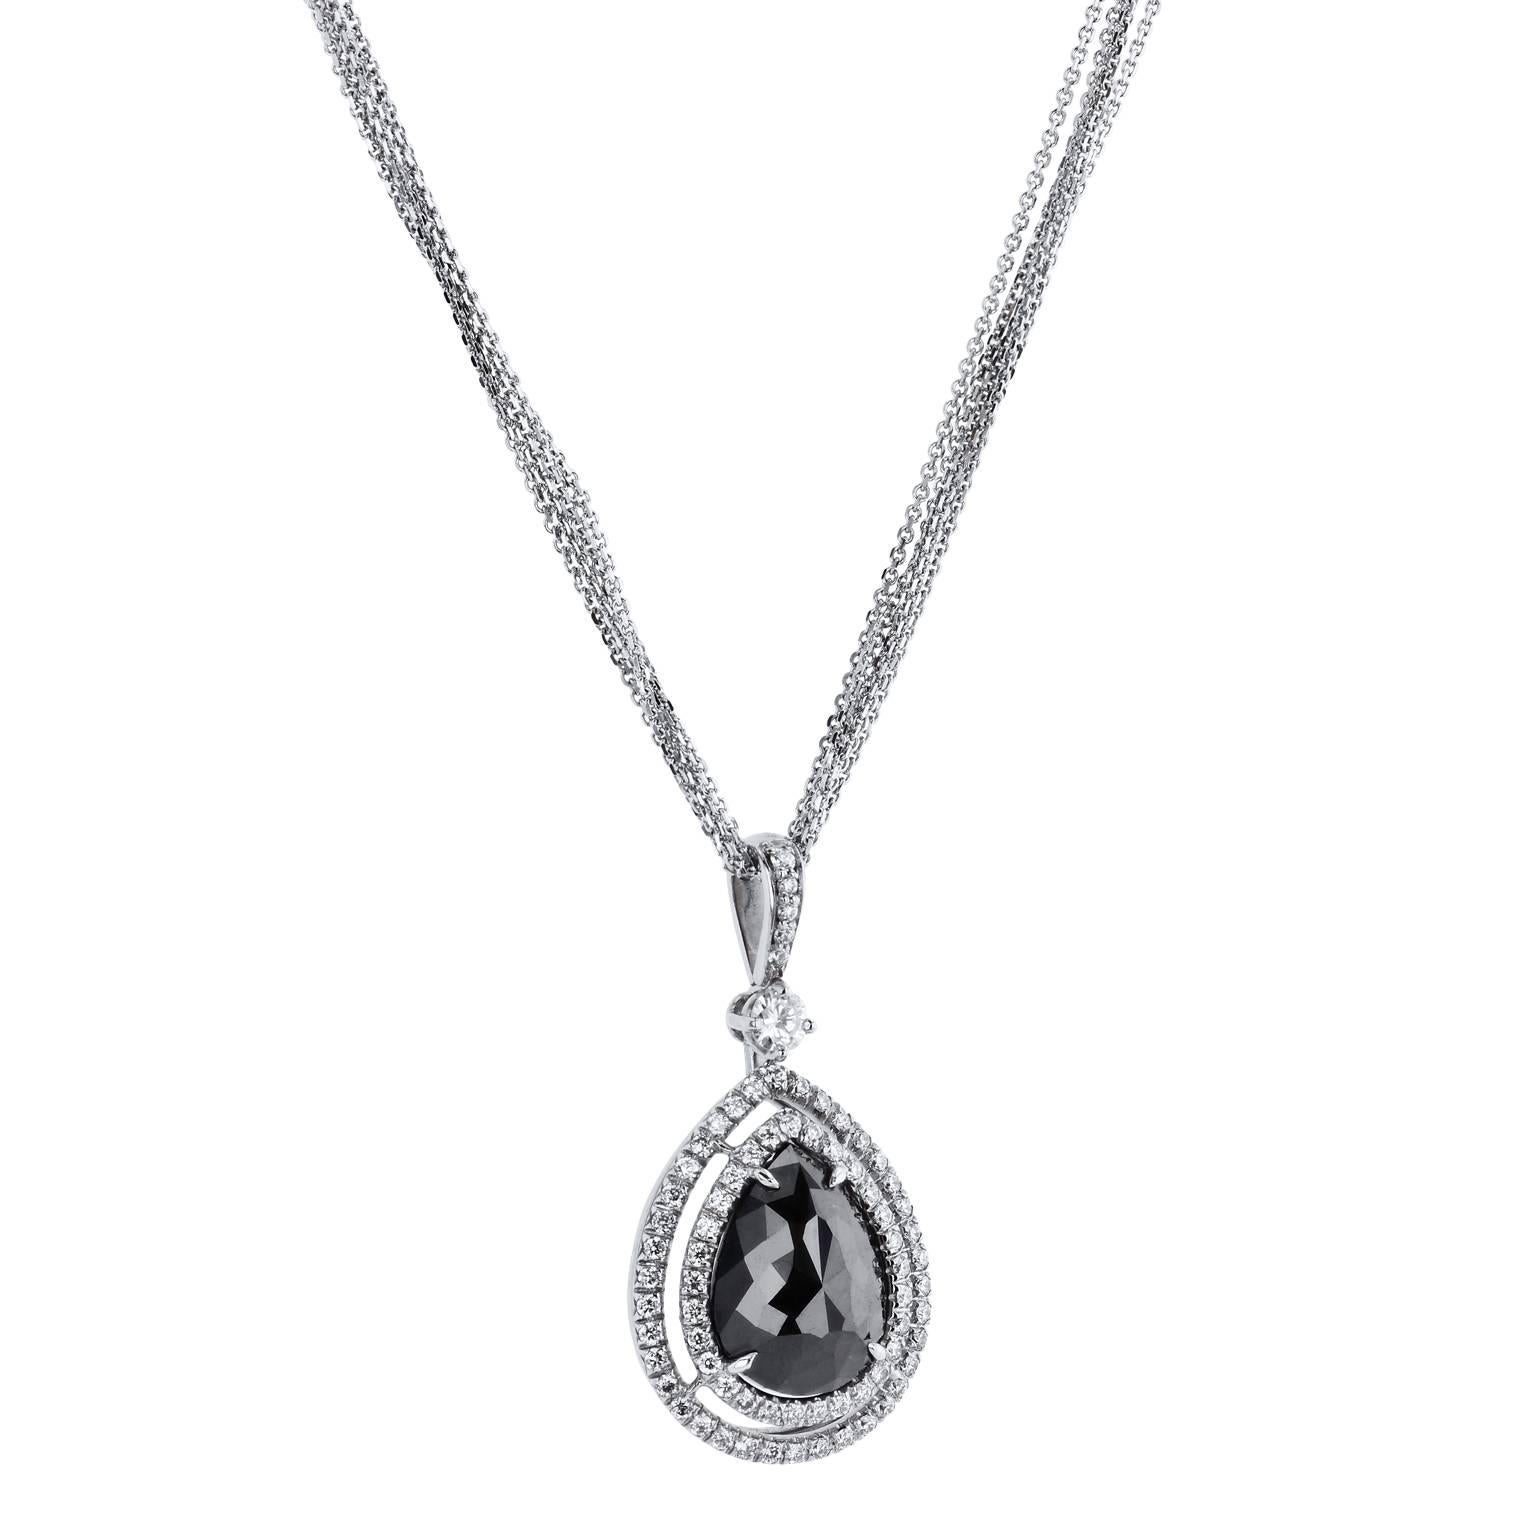 Femininity and mystery exude from this handmade H and H 18 karat white gold and pear shape rose cut black diamond pendant necklace. An impressive 3.79 carat pear-shaped rose cut black diamond is set at center in four prong setting. To further